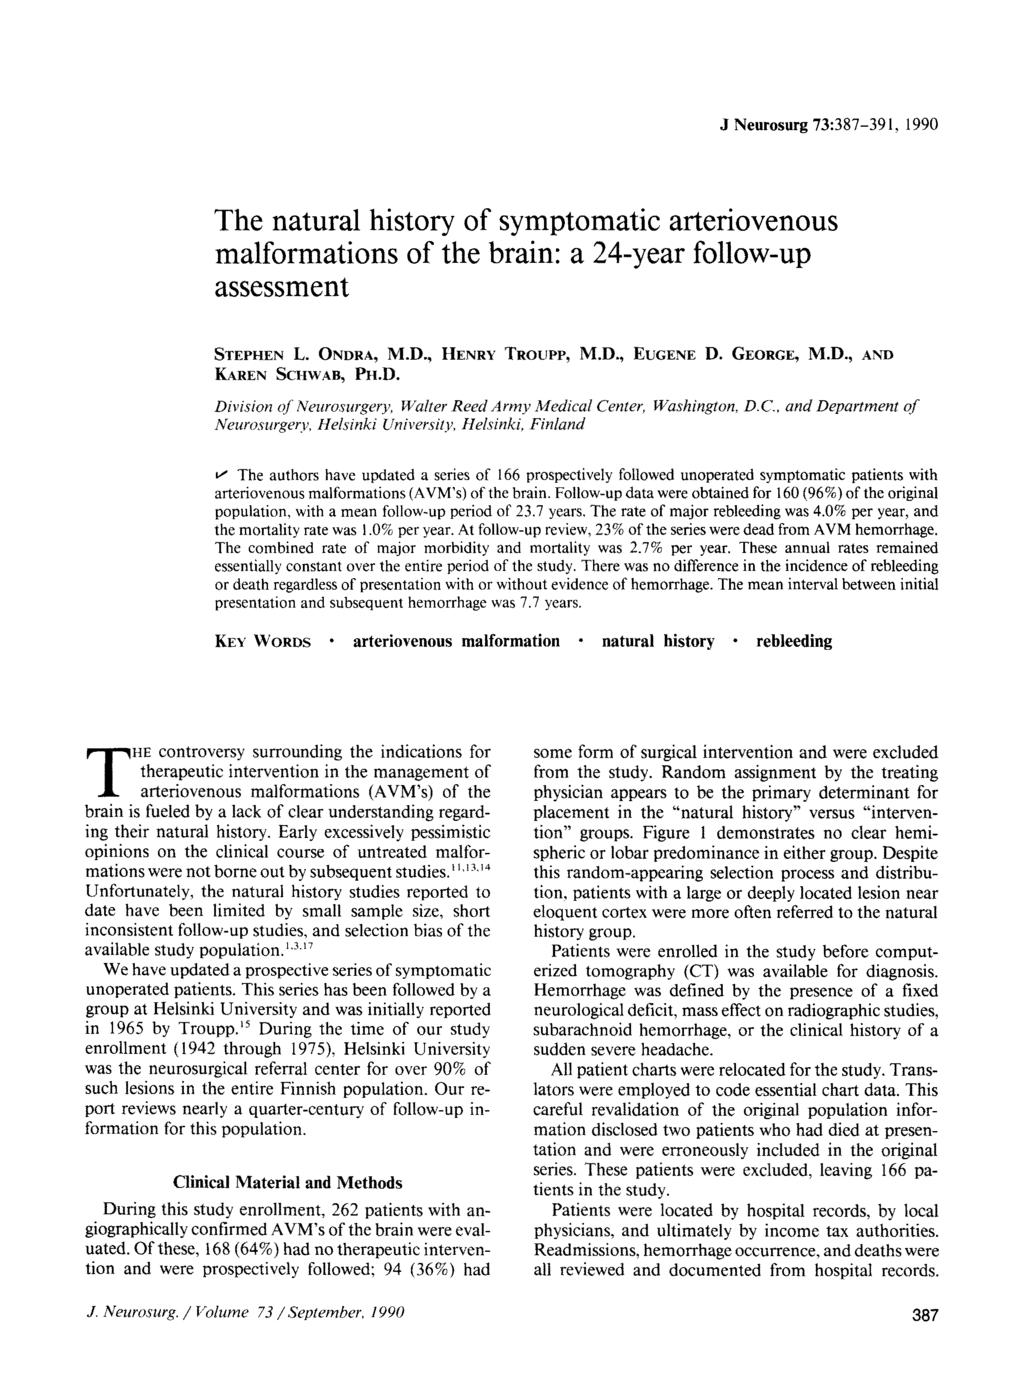 J Neurosurg 73:387-391, 1990 The natural history of symptomatic arteriovenous malformations of the brain: a 24-year follow-up assessment STEPHEN L. ONDRA, M.D., HENRY TROUPP, M.D., EUGENE D.